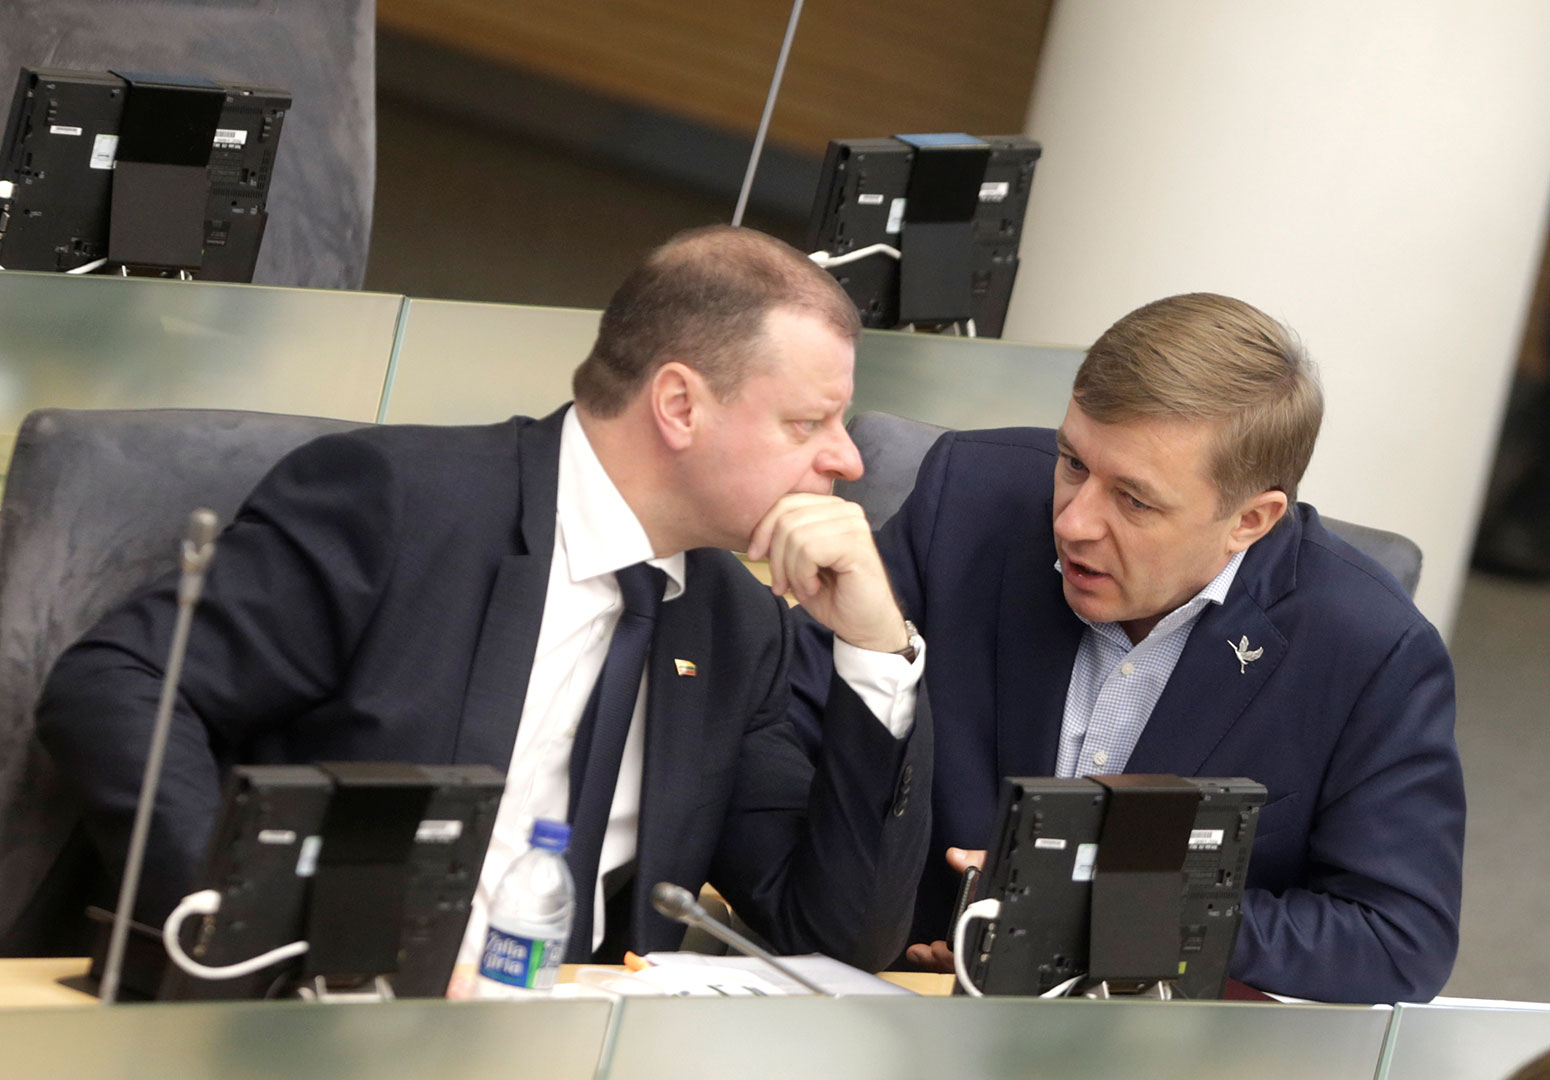 Saulius Skvernelis listens to Ramunas Karbauskis before his swearing in as prime minister in the Seimas, the Lithuanian parliament, December 2016. Credit: Ints Kalnins / Reuters